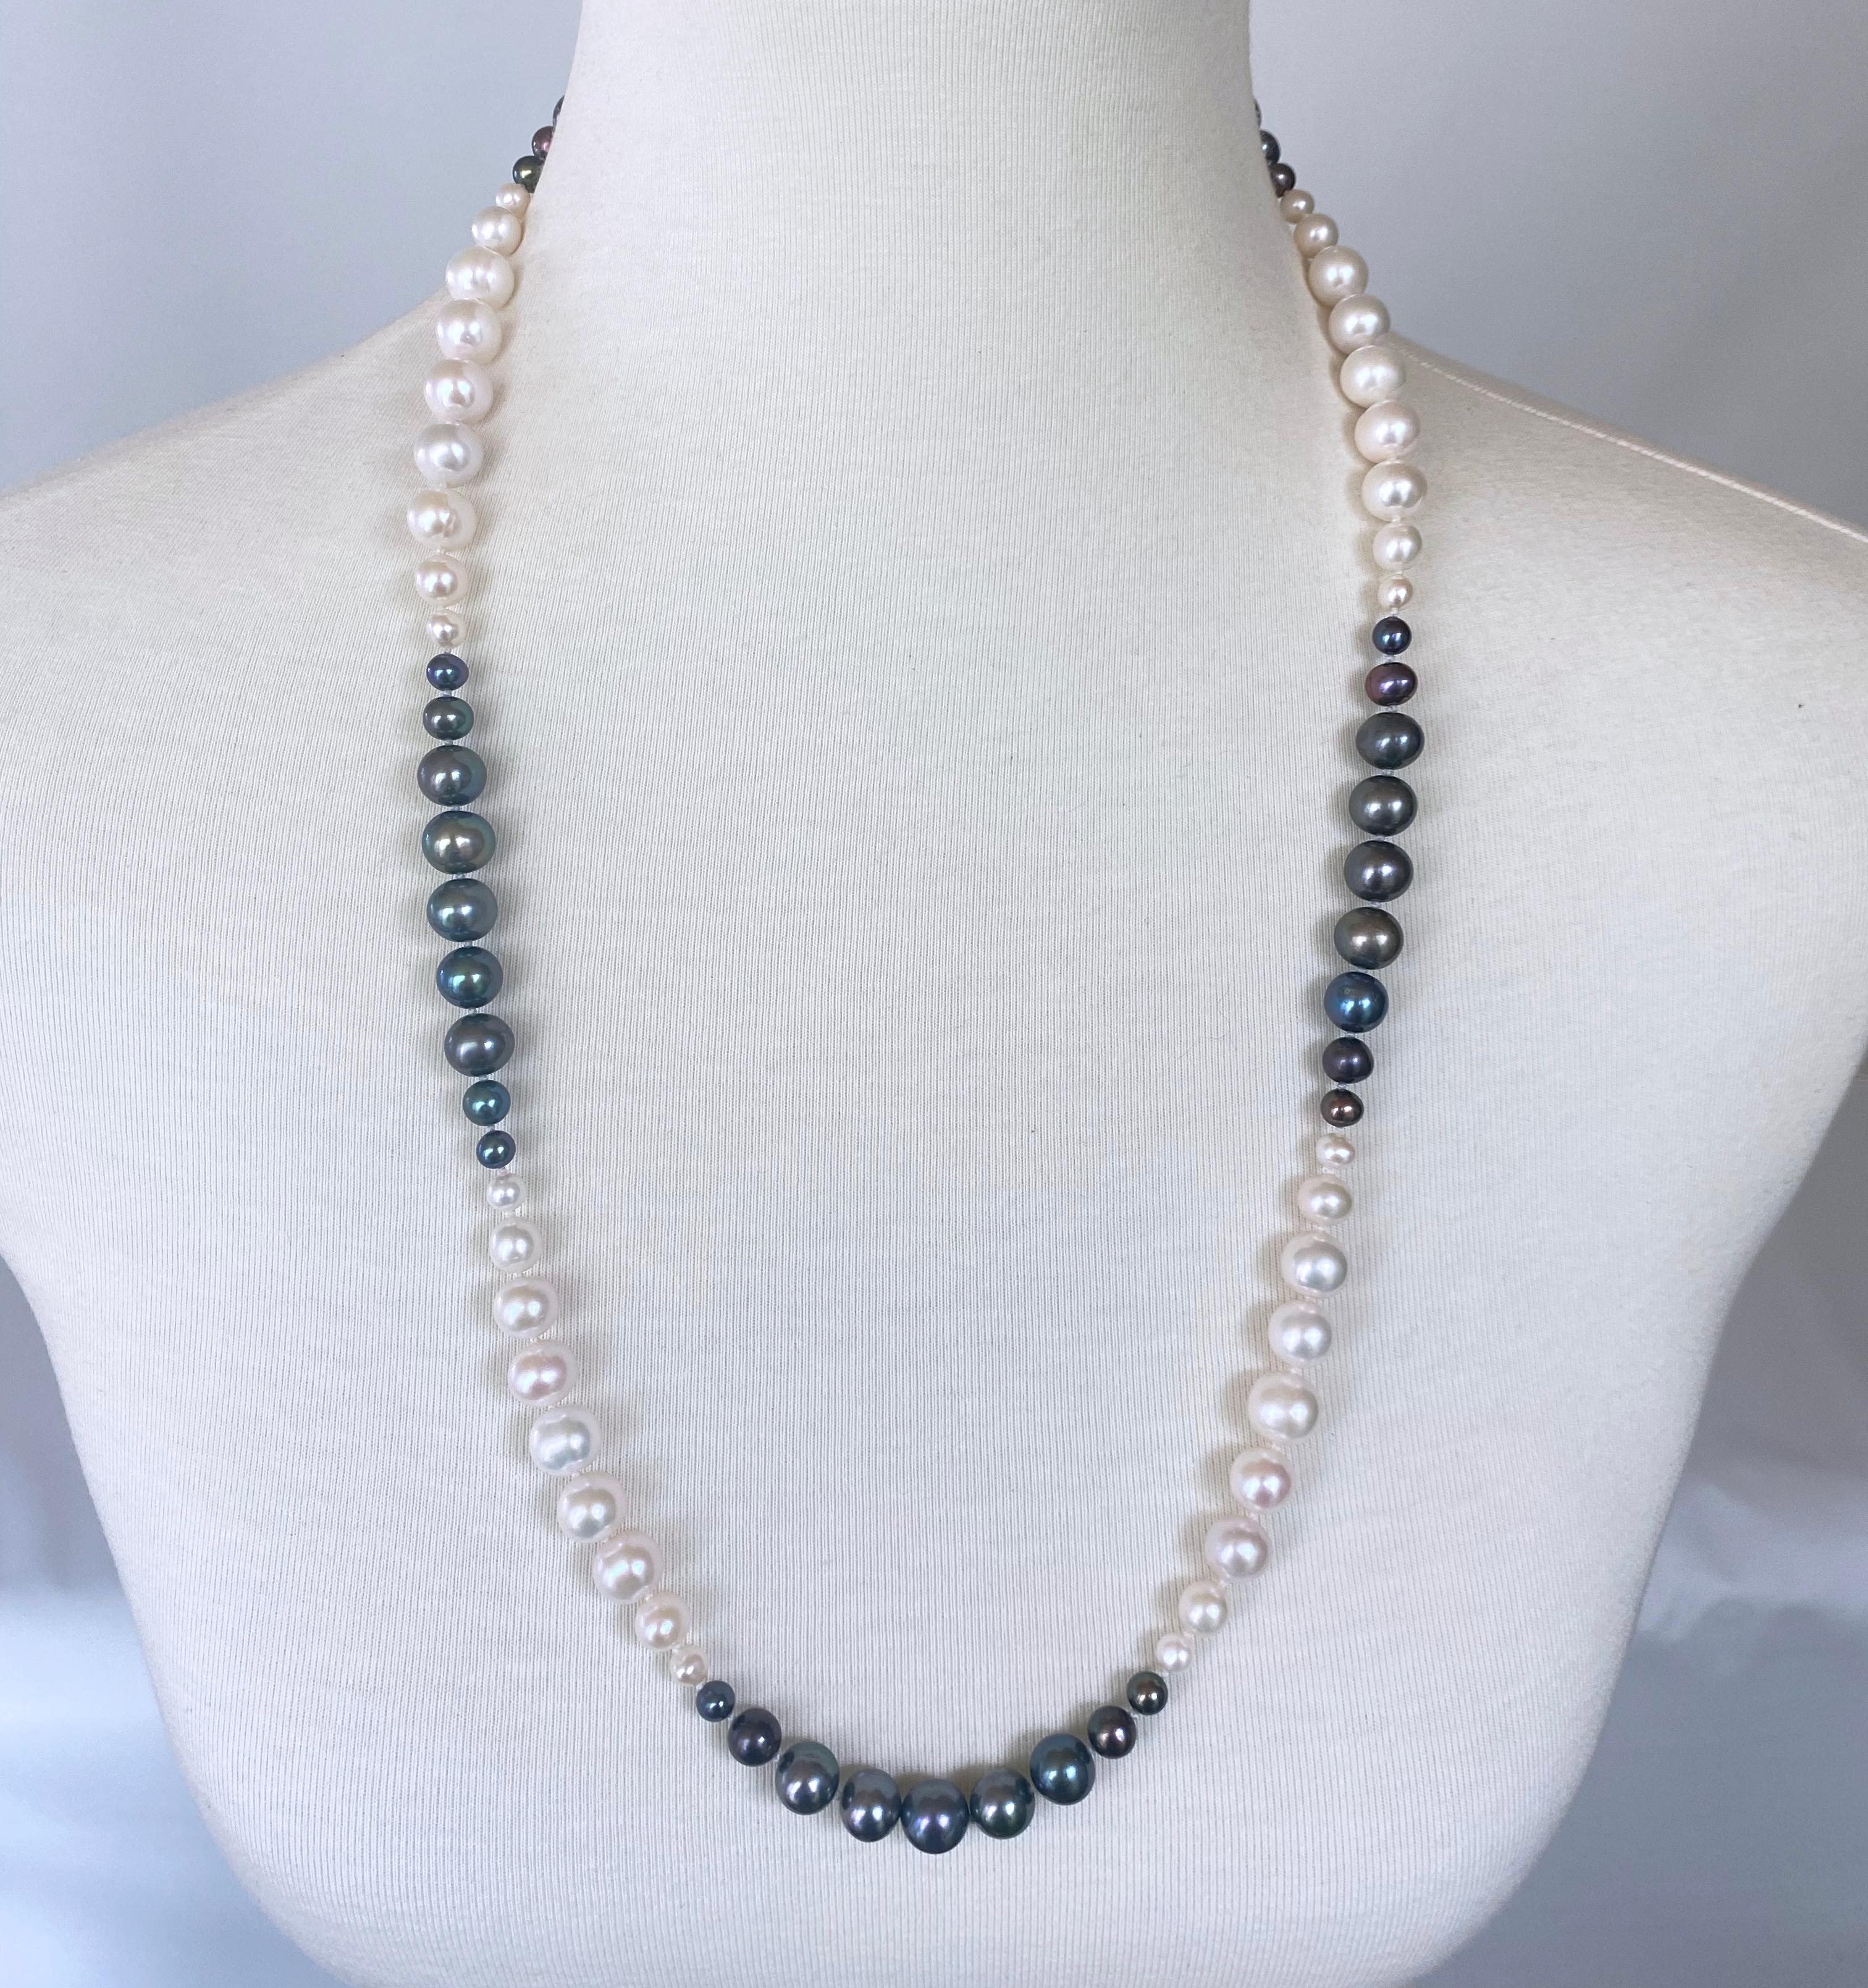 Gorgeous strung Pearl Ombre necklace by Marina J. This beautiful piece features all Cultured White and Black Pearls all strung together with multiple size Graduations. The Pearls displays a wonderful sheen to them and all Black Pearls feature a